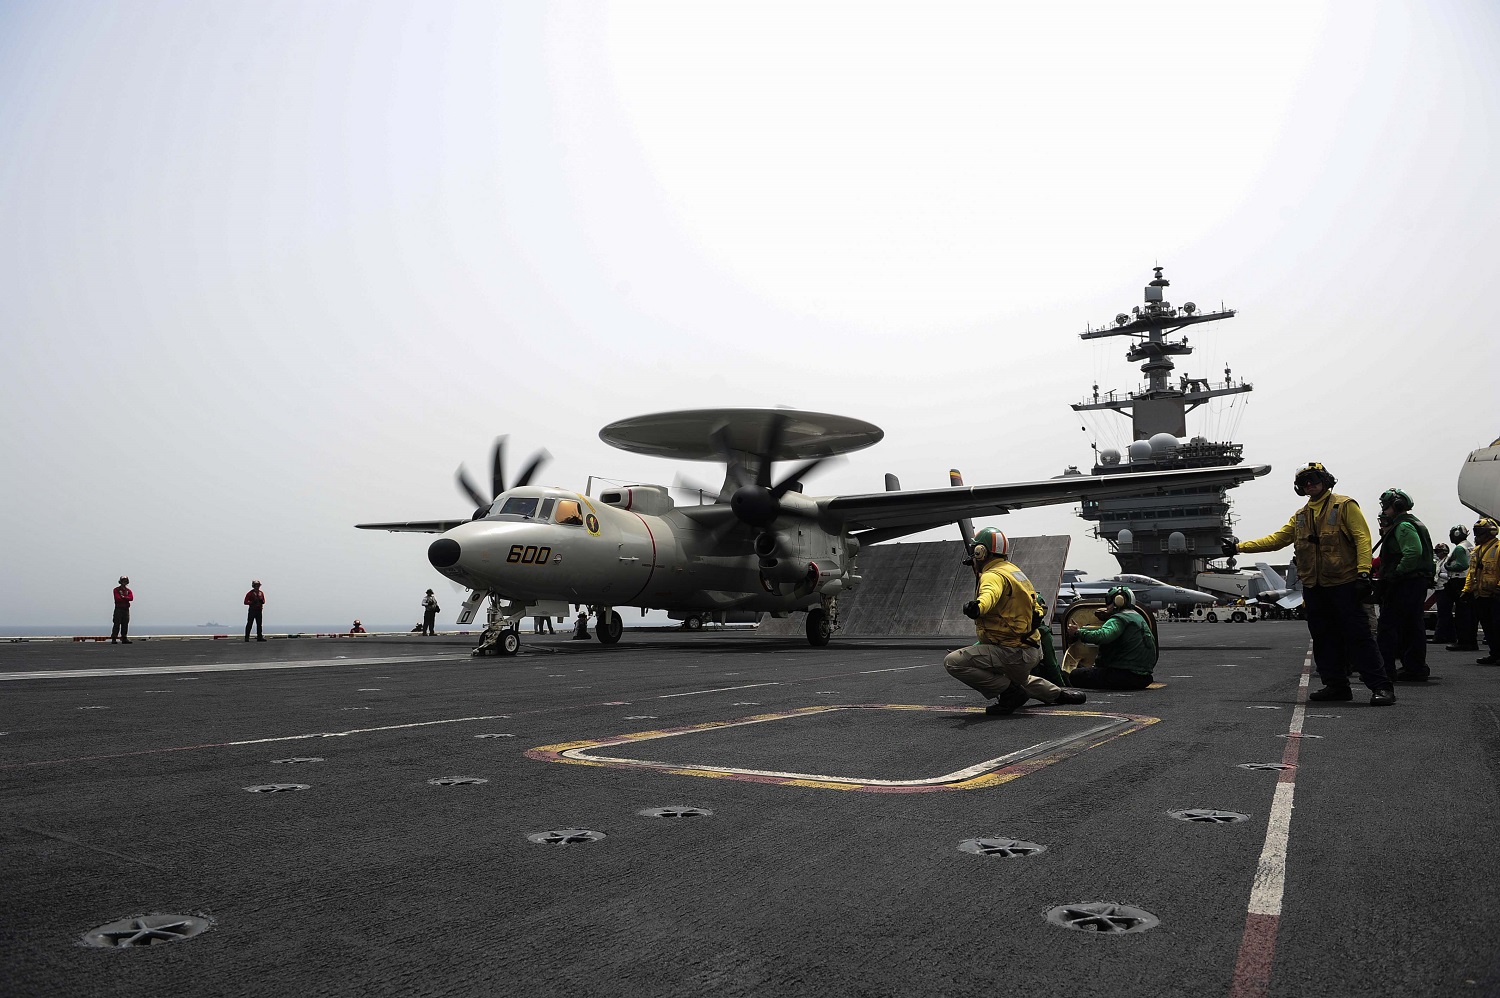 U.S. 5TH FLEET AREA OF OPERATIONS (April 28, 2015) An E-2D Hawkeye, assigned to the Tigertails of the Carrier Airborne Early Warning Squadron (VAW) 125, prepares to launch from the flight deck of the aircraft carrier USS Theodore Roosevelt (CVN 71). Theodore Roosevelt is deployed to the U.S. 5th Fleet area of operations conducting maritime security operations. U.S. Navy photo by Mass Communication Specialist Seaman Anna Van Nuys 